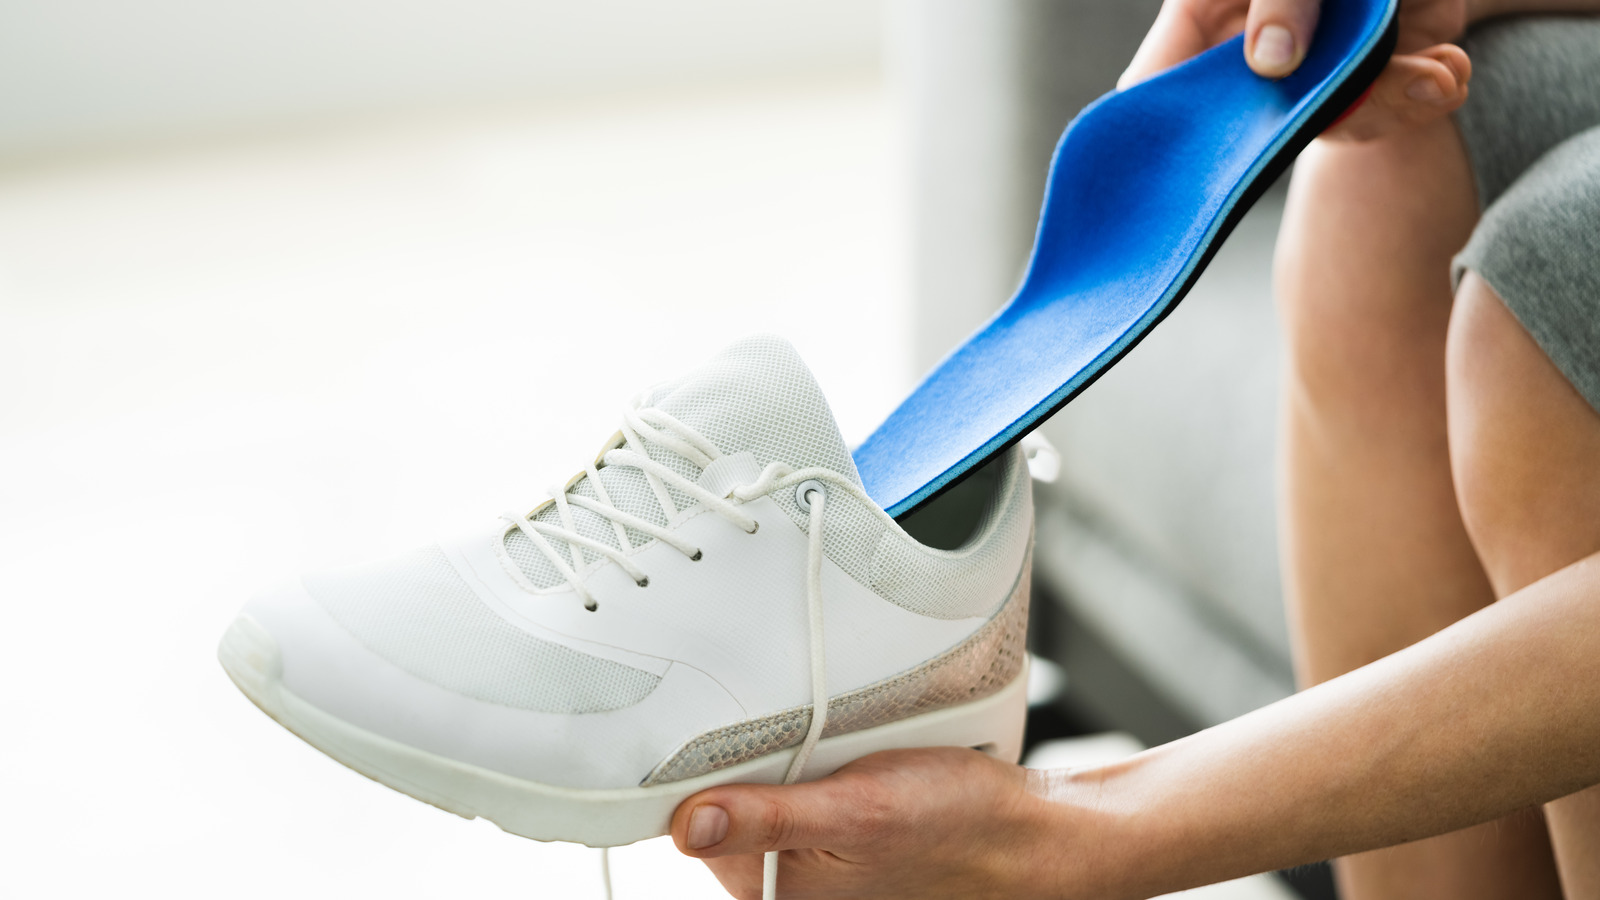 Insoles: Stop Fighting It And Buy Them Already (Your Feet Deserve It)